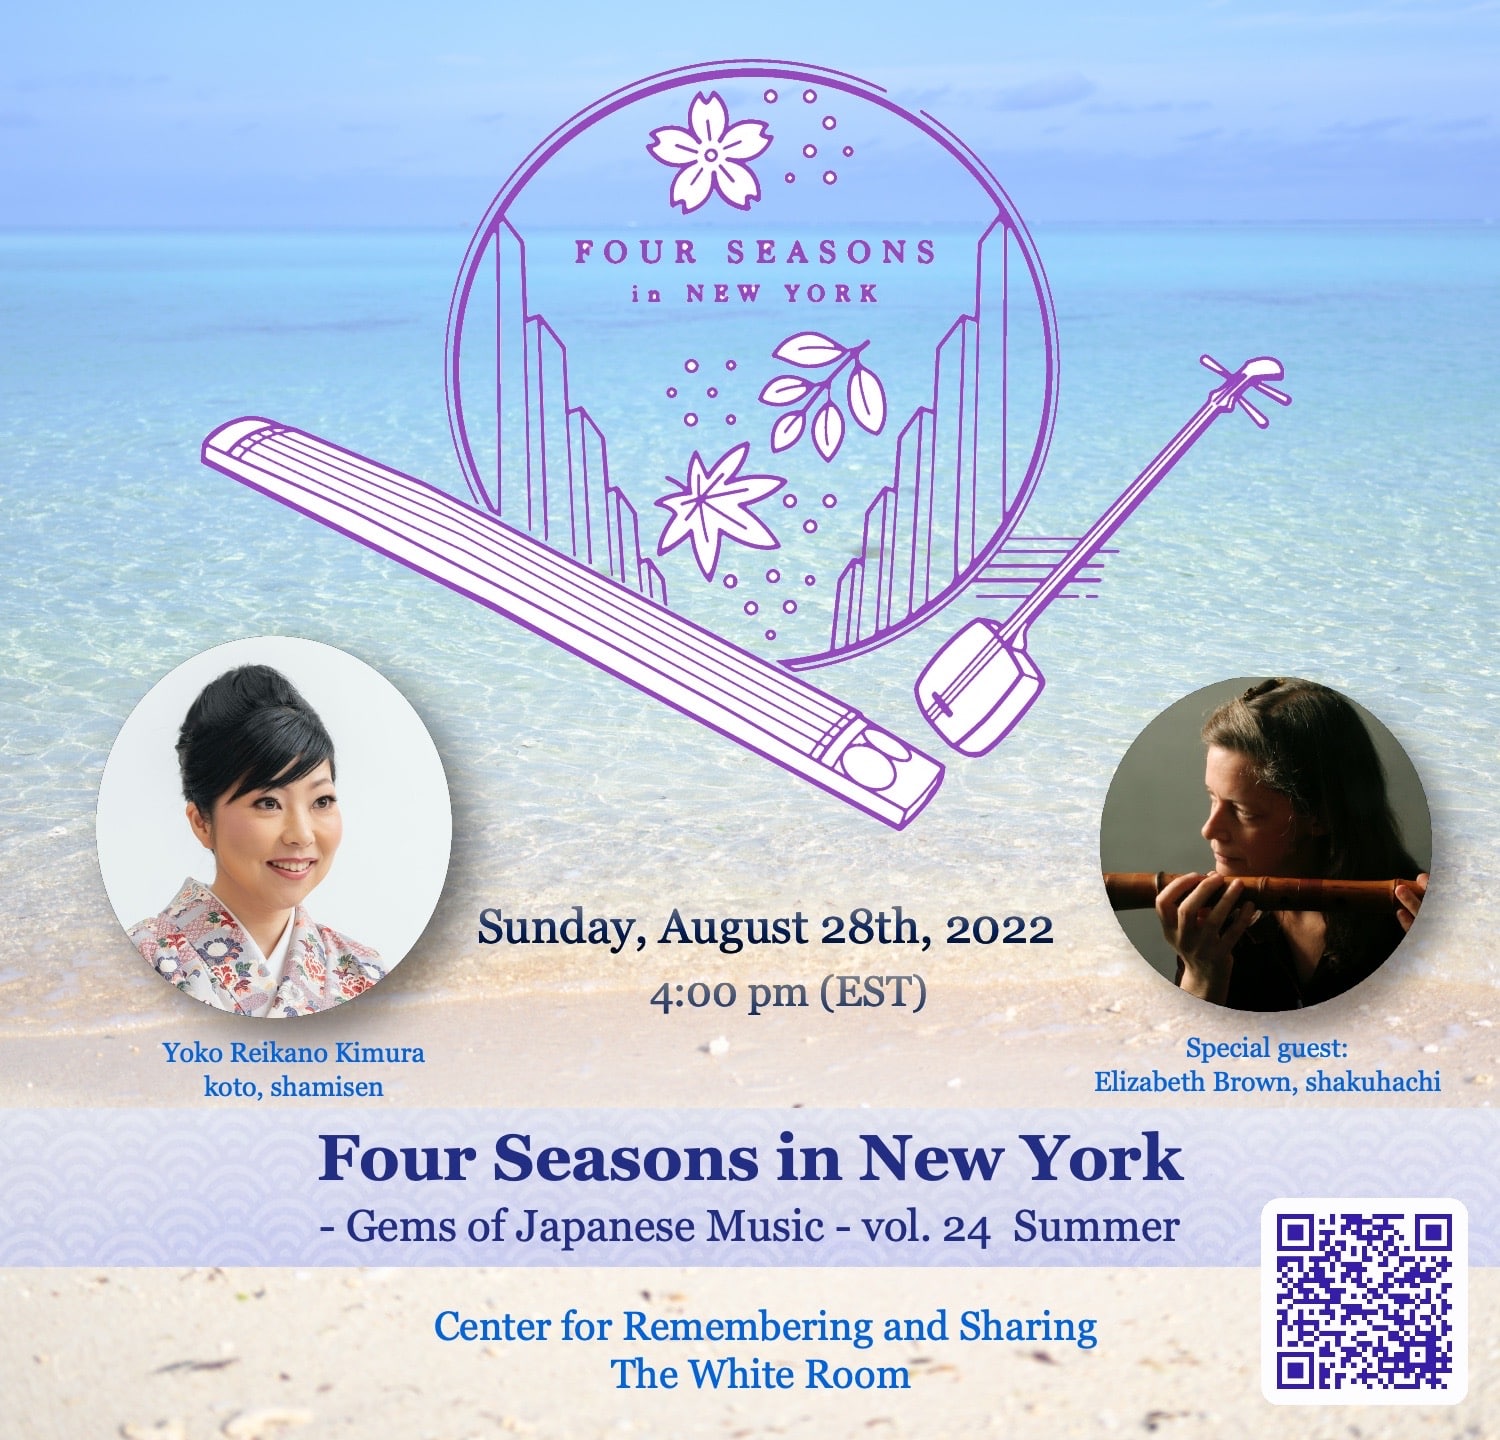 Four Seasons in NY: Gems of Japanese Music Vol. 24